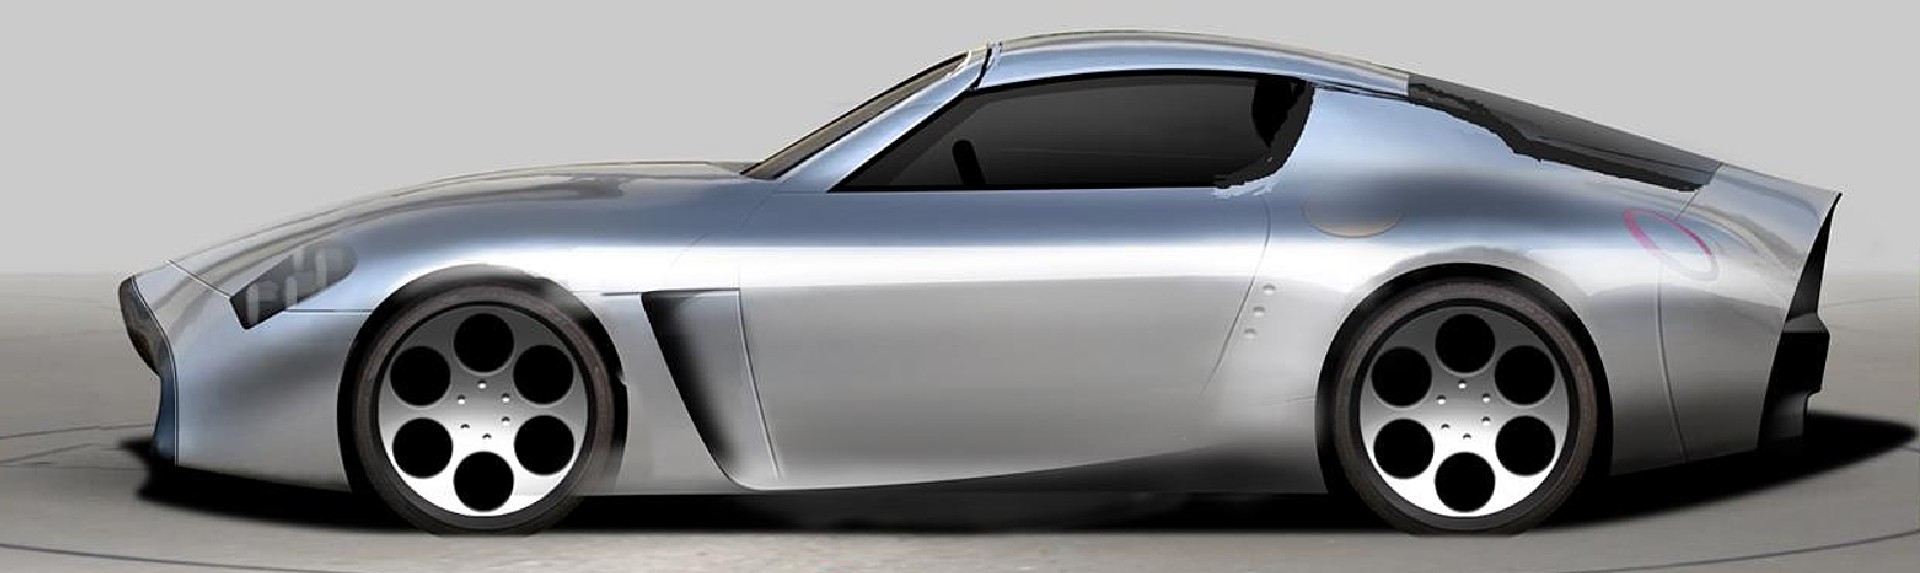 Toyota-GR-Supra-Early-Sketches-3.jpg